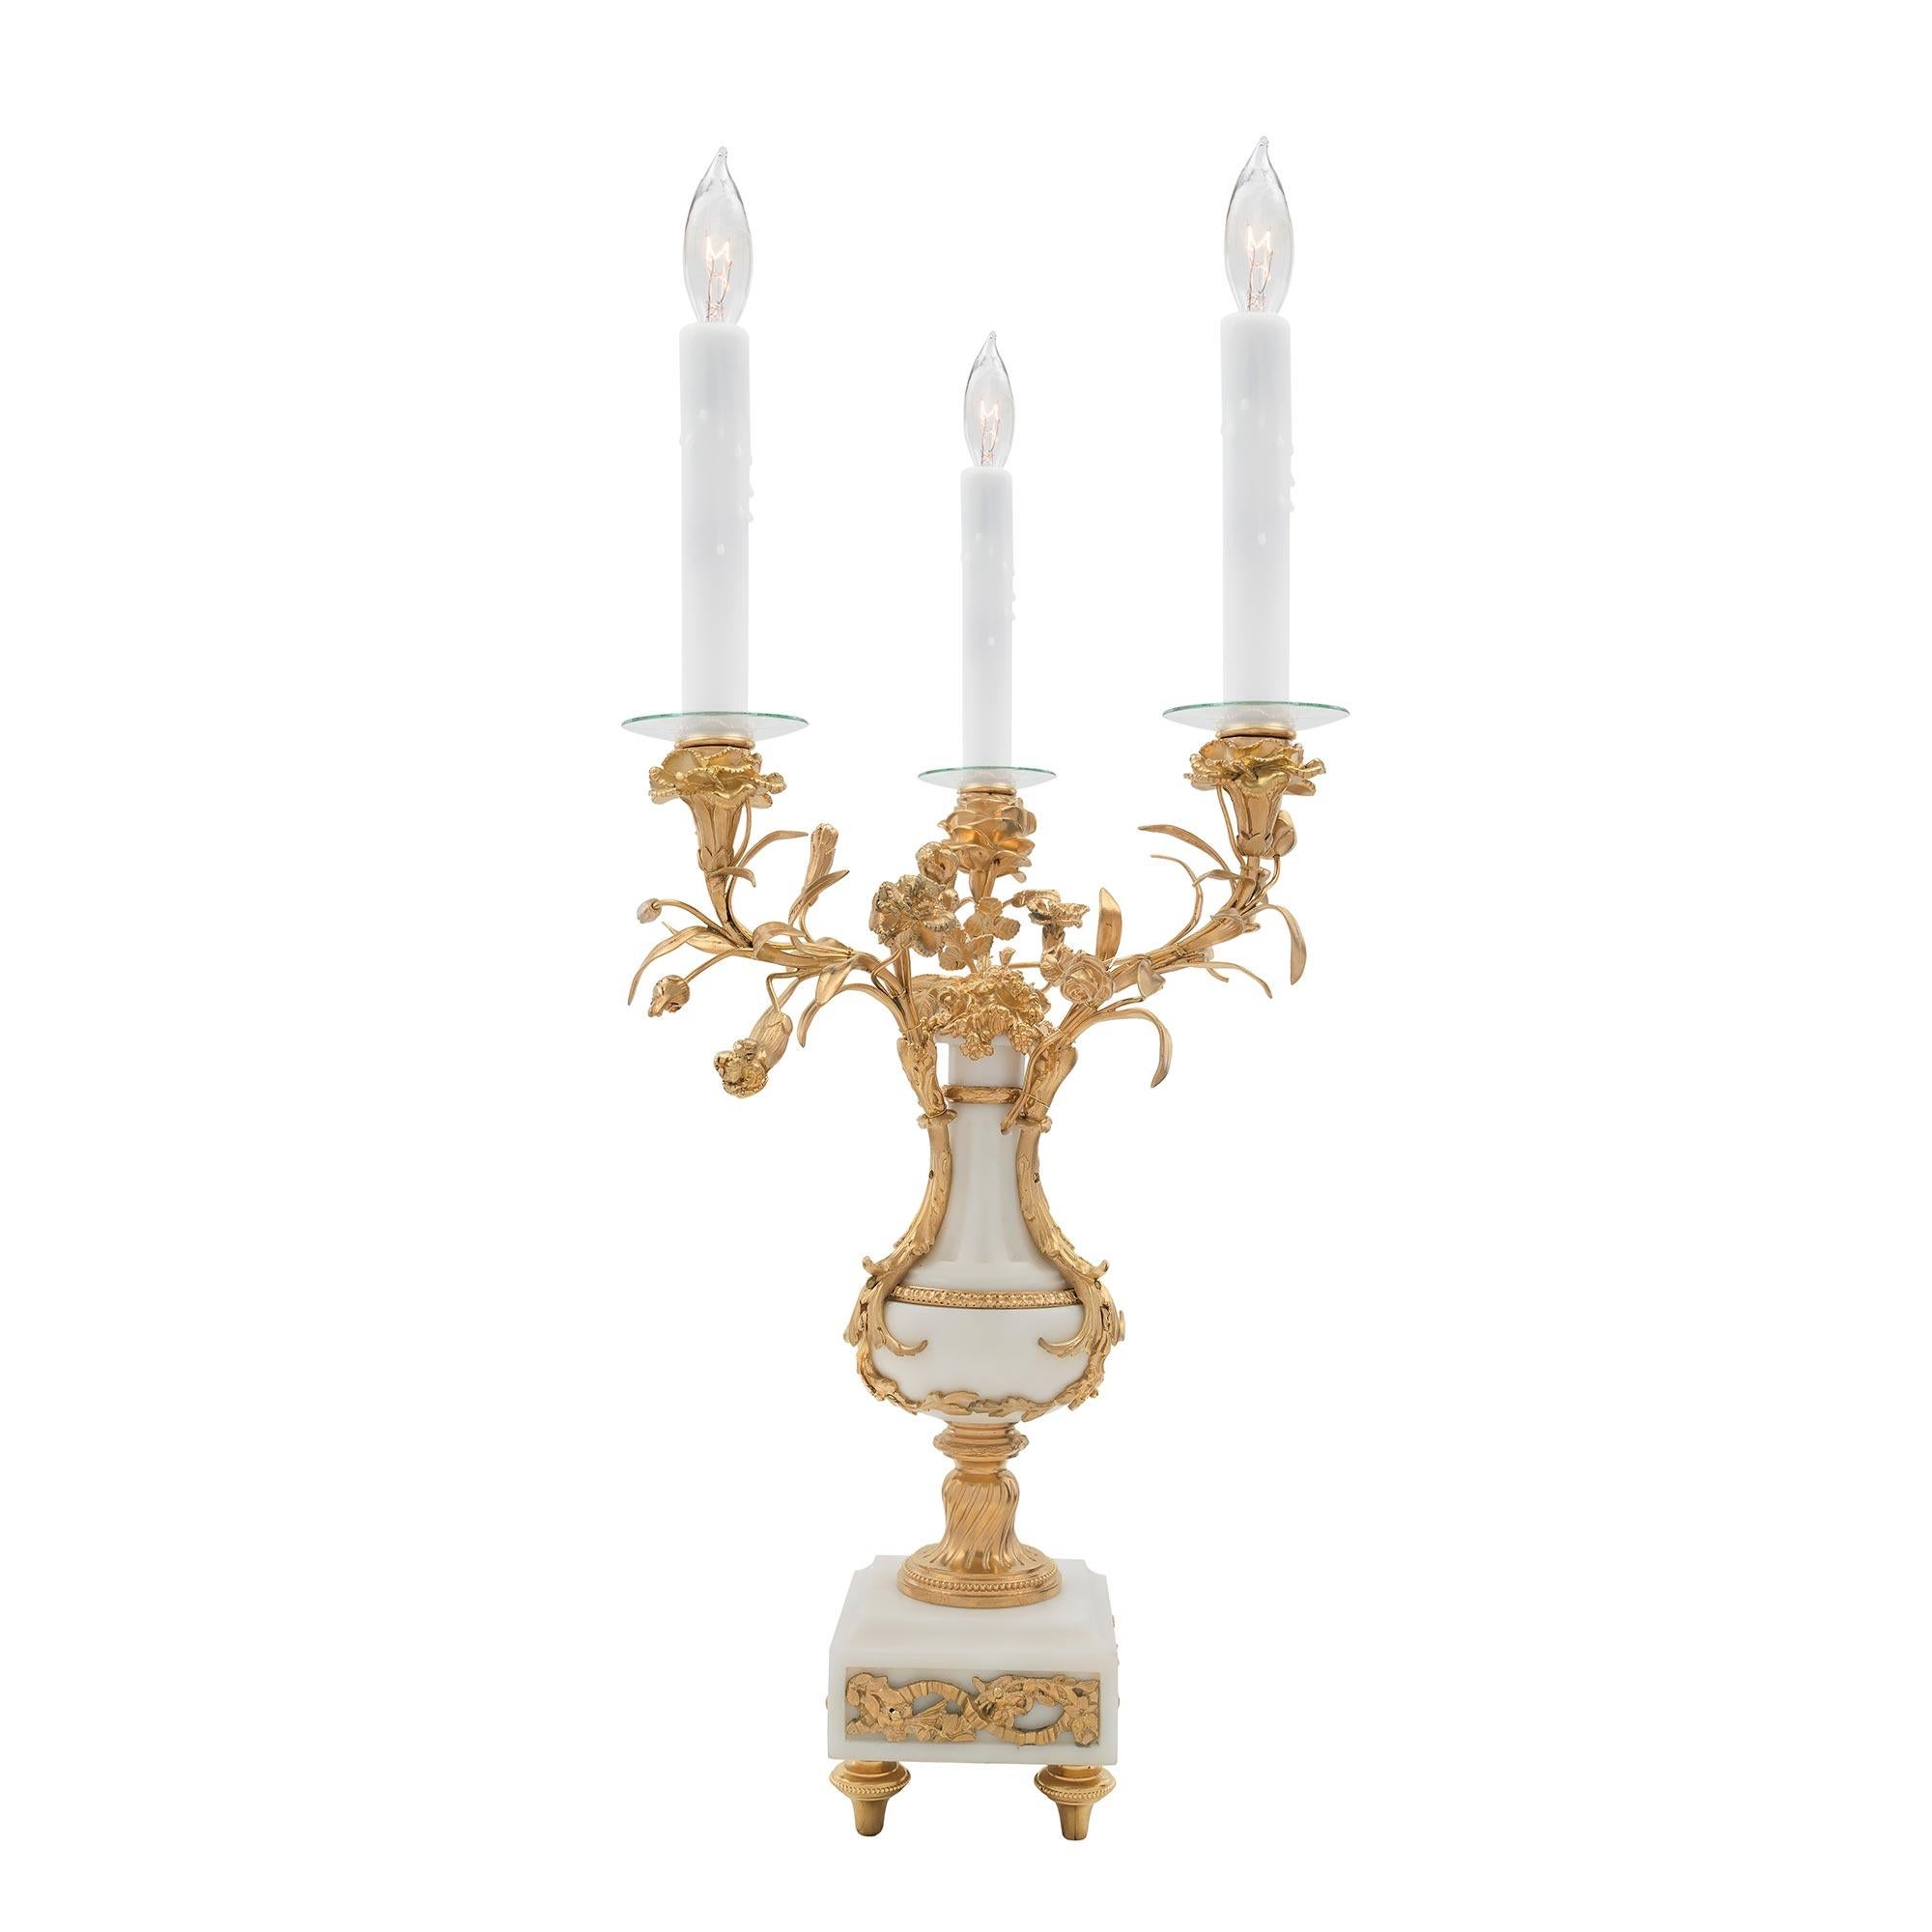 A pair of elegant and uniquely shaped French 19th Century Louis XVI st. three-arm electrified candelabras. Each is raised by a square white carrara marble base with recessed central panels and pierced ormolu mounts all above topie shaped ormolu